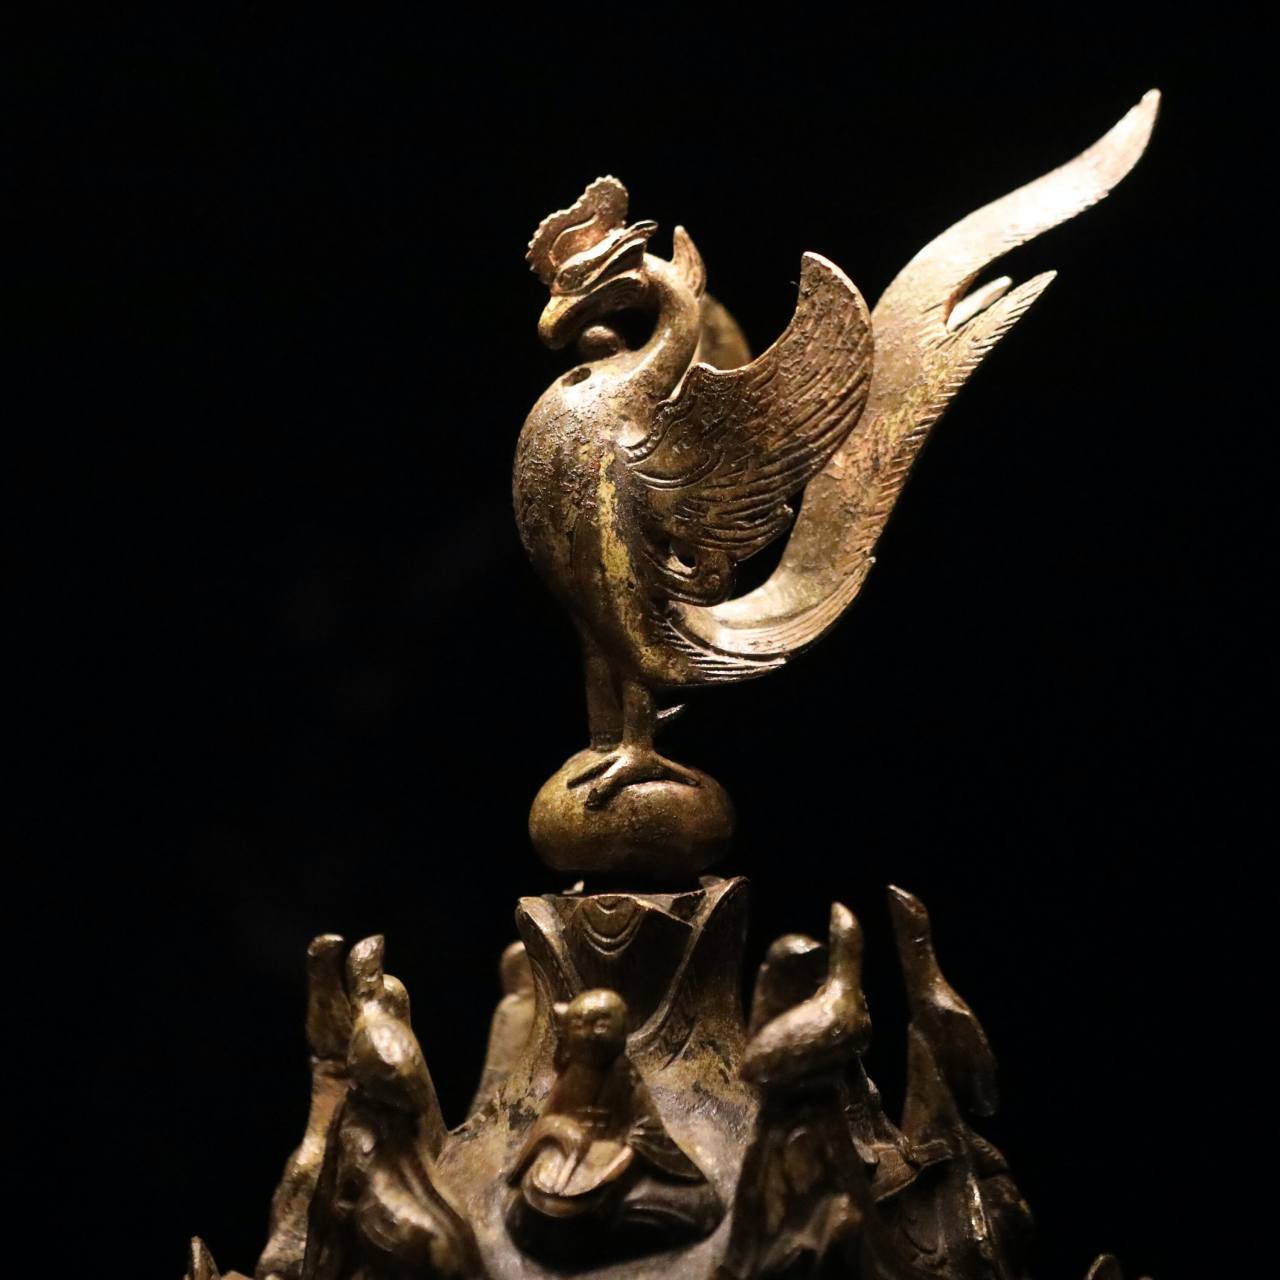 A Phoenix sits on top of the Gilt-bronze Incense Burner of Baekje, Korea’s National Treasure No. 287. The incense burner clearly features animals from distant places, not indigenous to Korea, testifying to the far reaches of the Baekje Empire’s maritime presence and the empire’s 22 “damro” vassal states.Photo © 2020 Hyungwon Kang